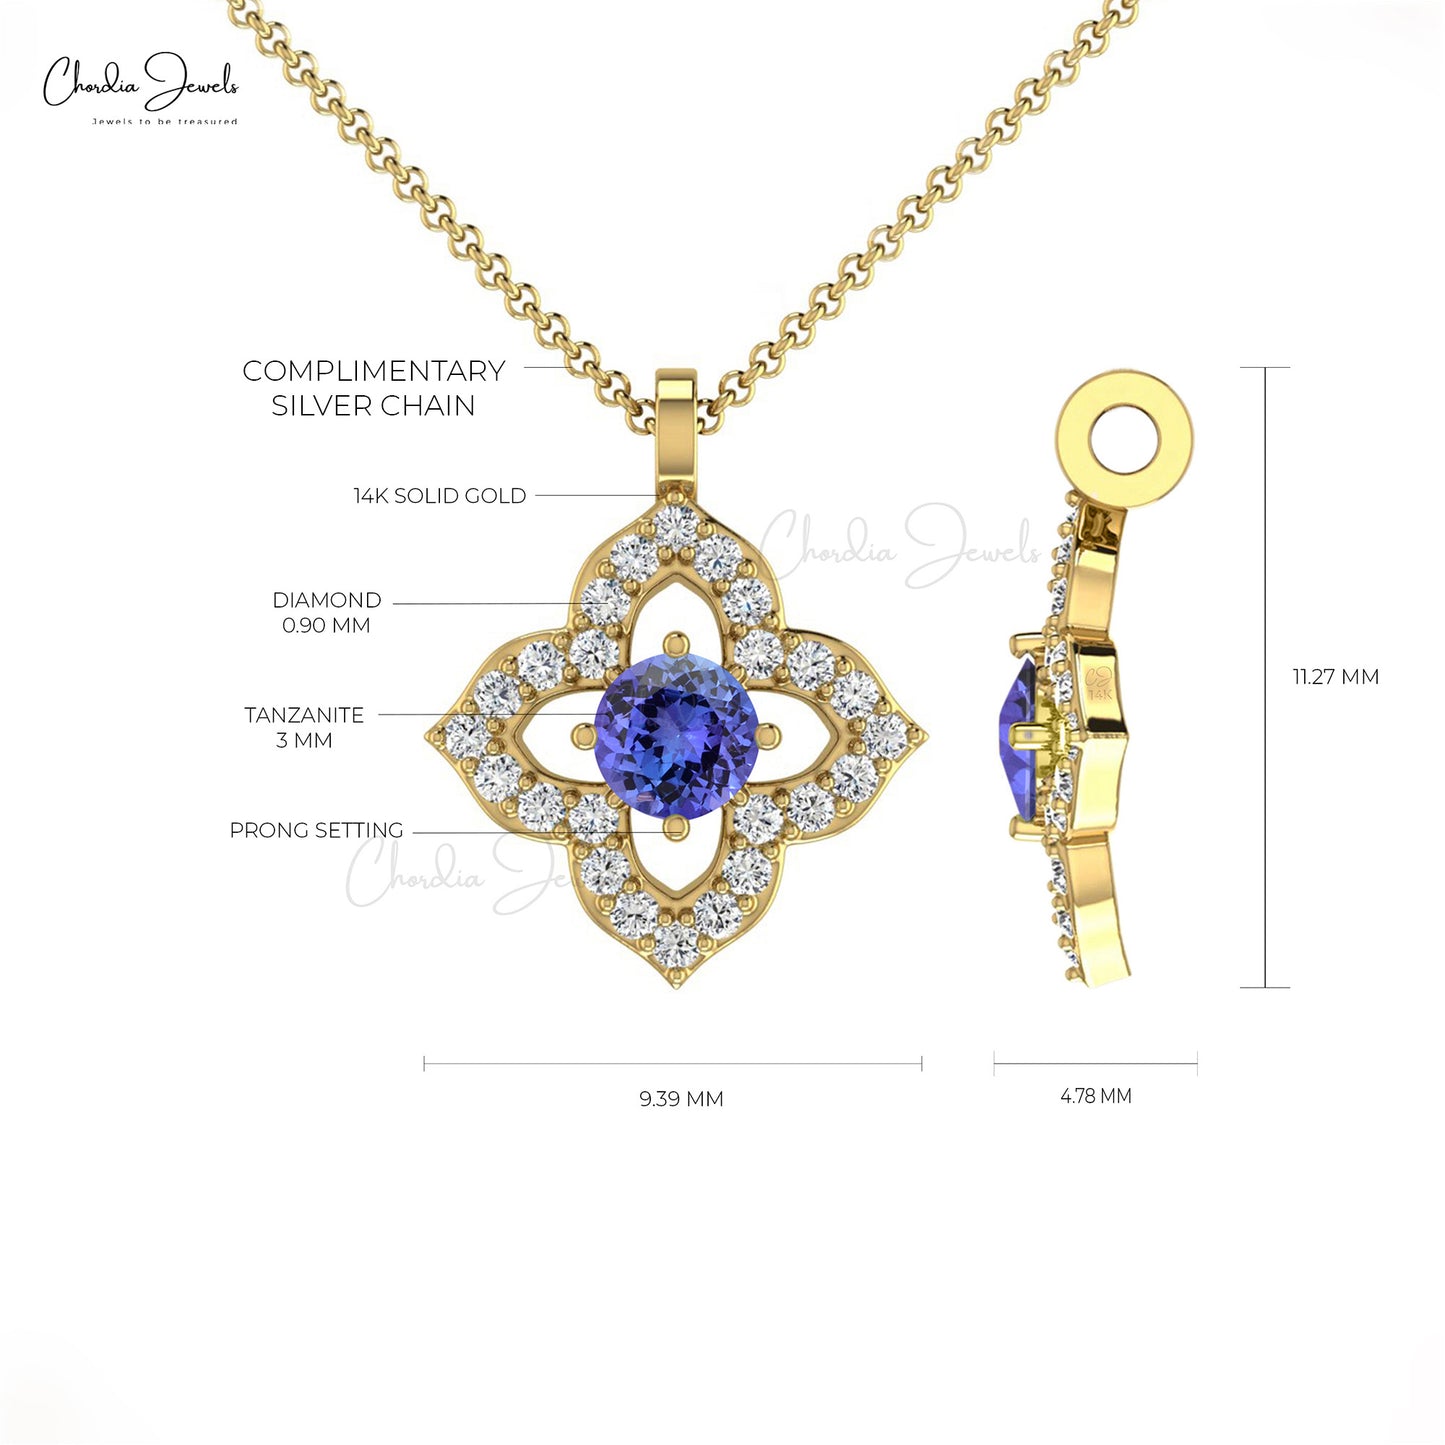 Beautiful Floral Pendant 3mm Round Natural Tanzanite Gemstone Pendant Necklace 14k Pure Gold Diamond Jewelry For Valentine's Day Gift